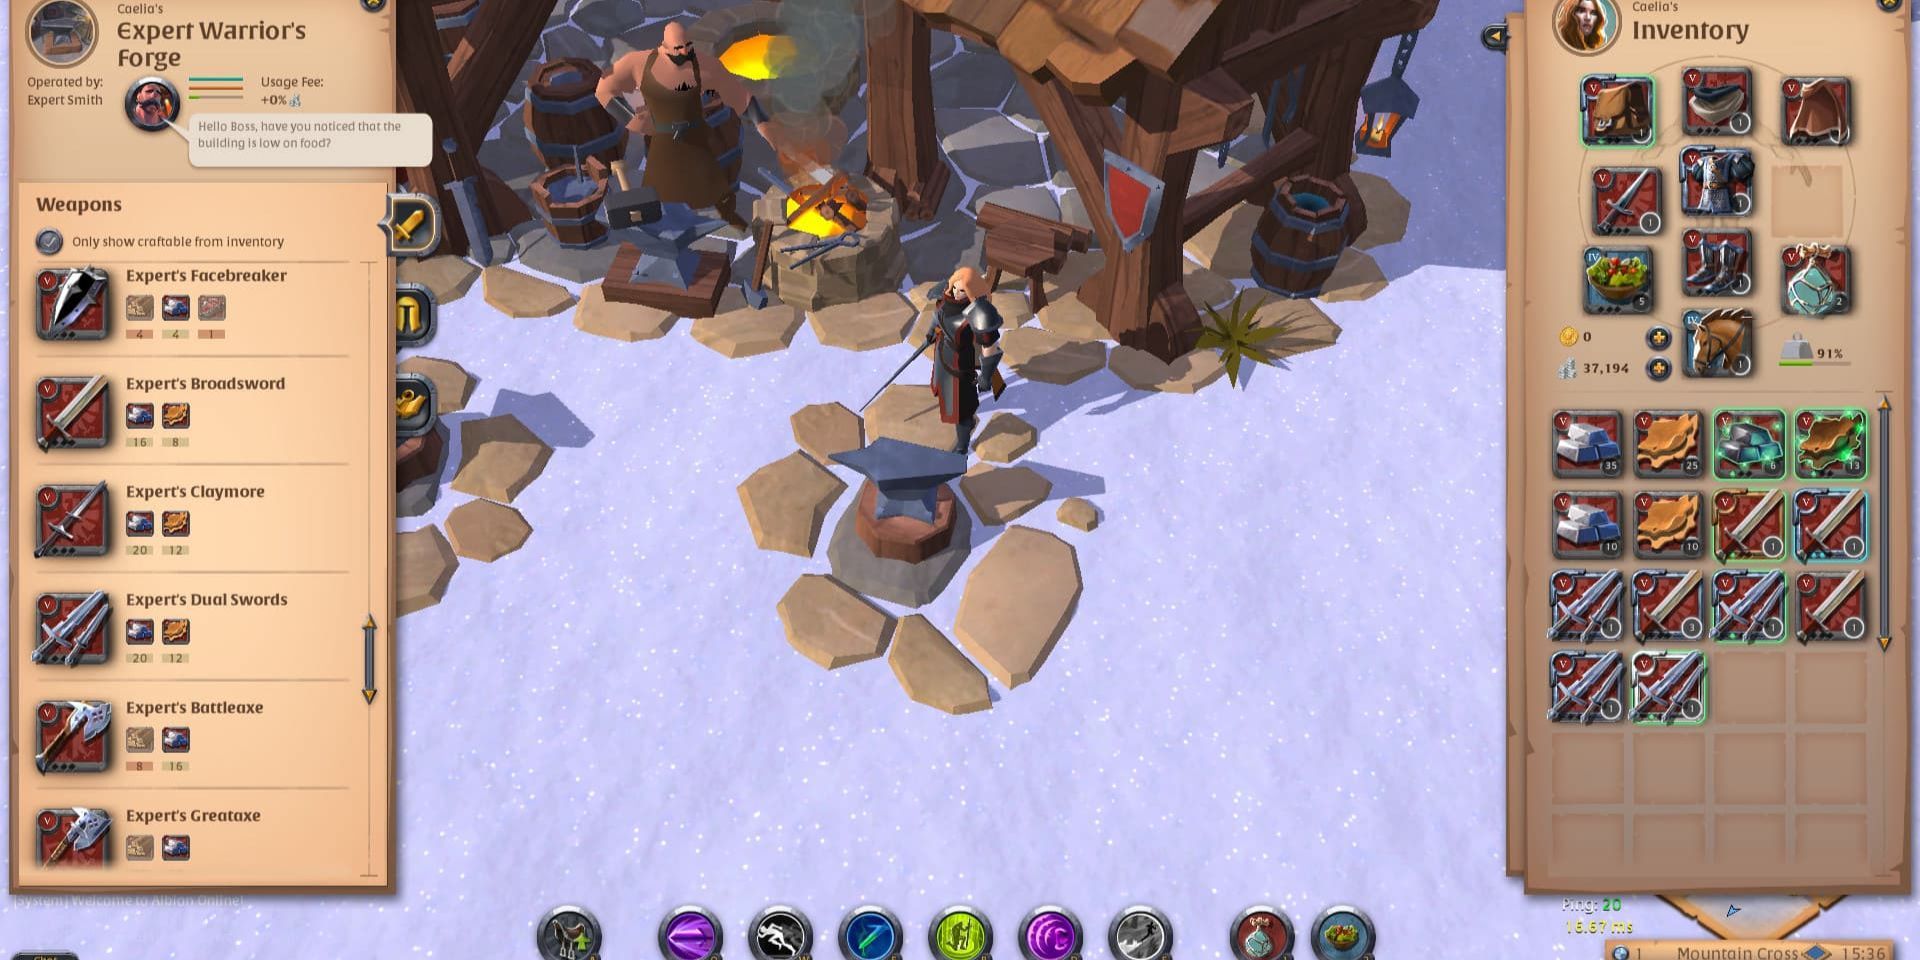 A screenshot from Albion Online